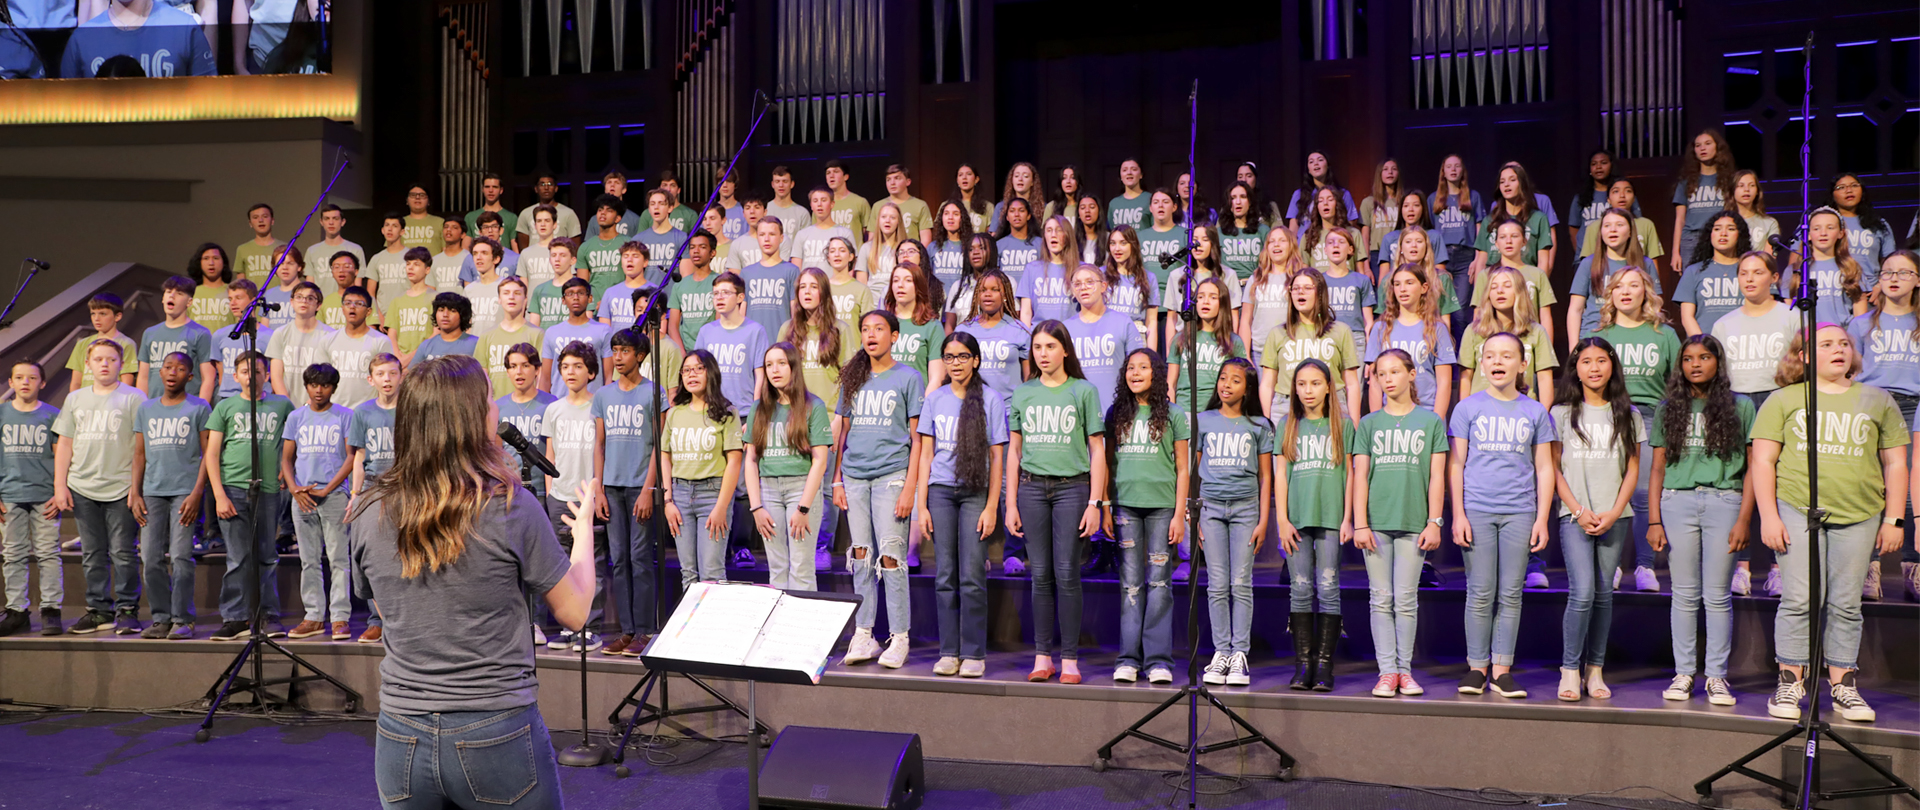 Student Worship Ministry
Choir, Band, One Voice, & Orchestra
Register now!
